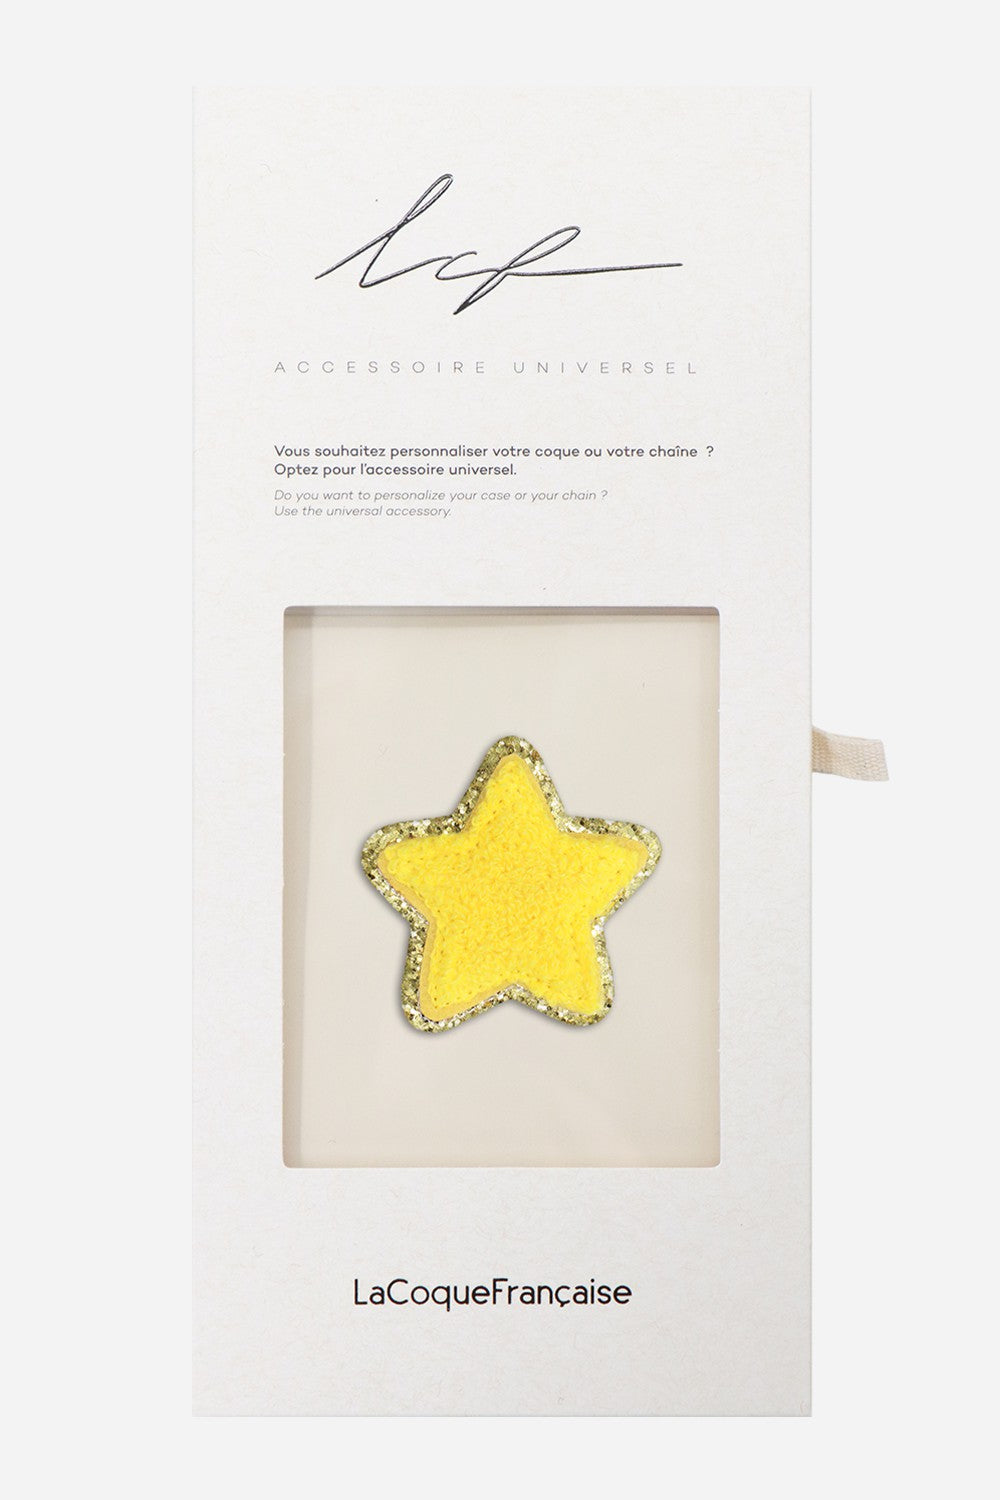 Yellow Star Patch